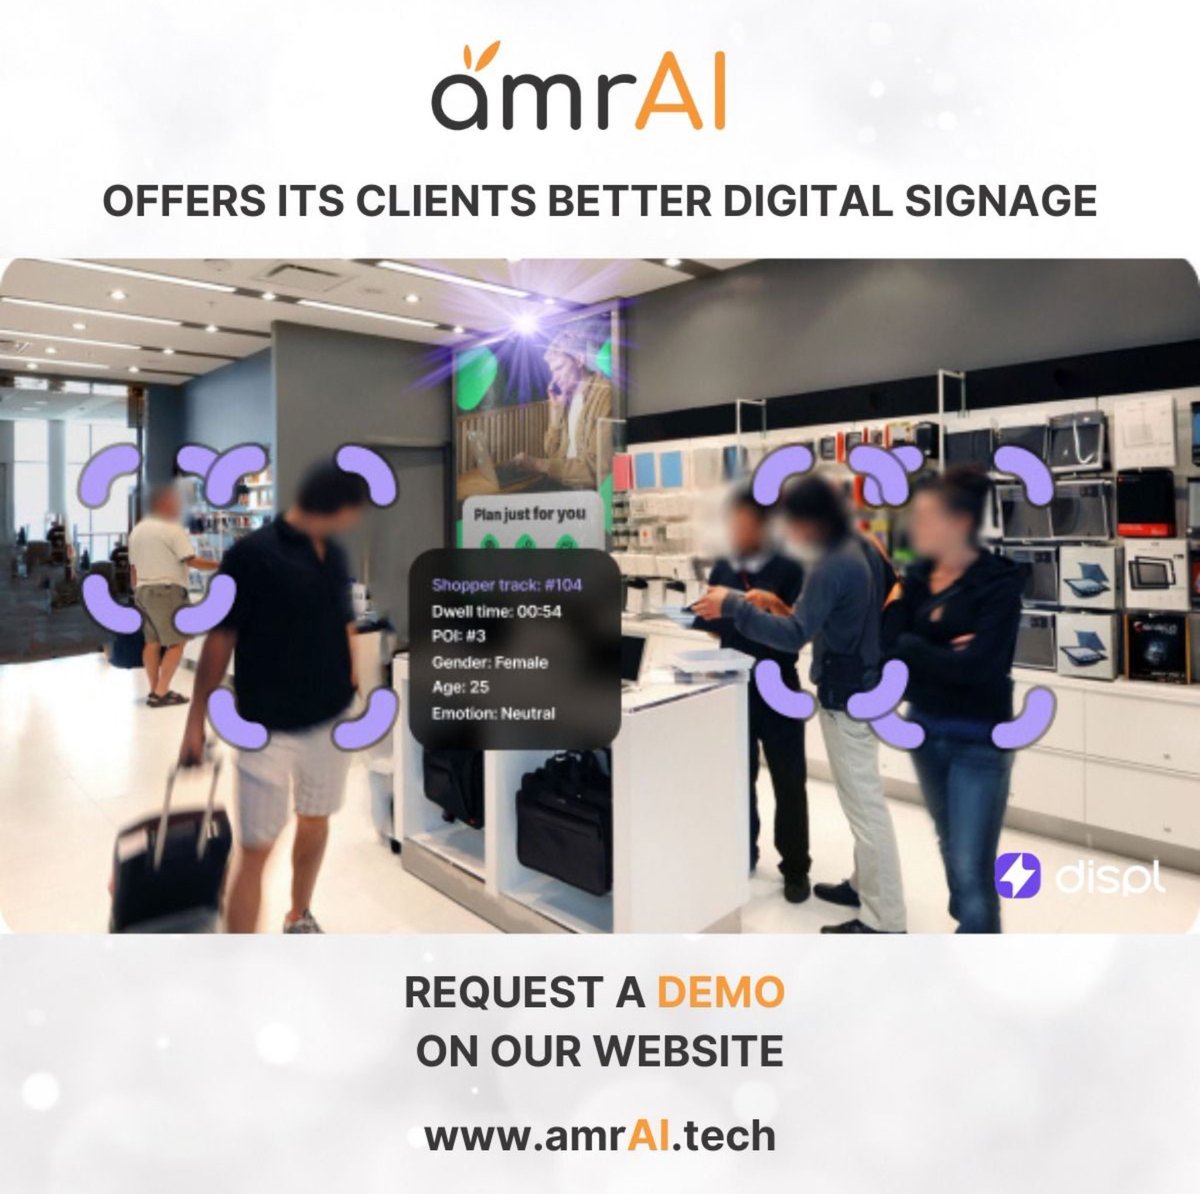 Leveraging #AI for Better Digital Signage

Powered by computer vision and machine learning, our solution analyzes camera feed data in real-time to optimize on-store #advertising and #engagement.

#amrAI #DisplayAds #NewWayOfAdvertising #DisplayRobotics #NewTechOnTheBlock